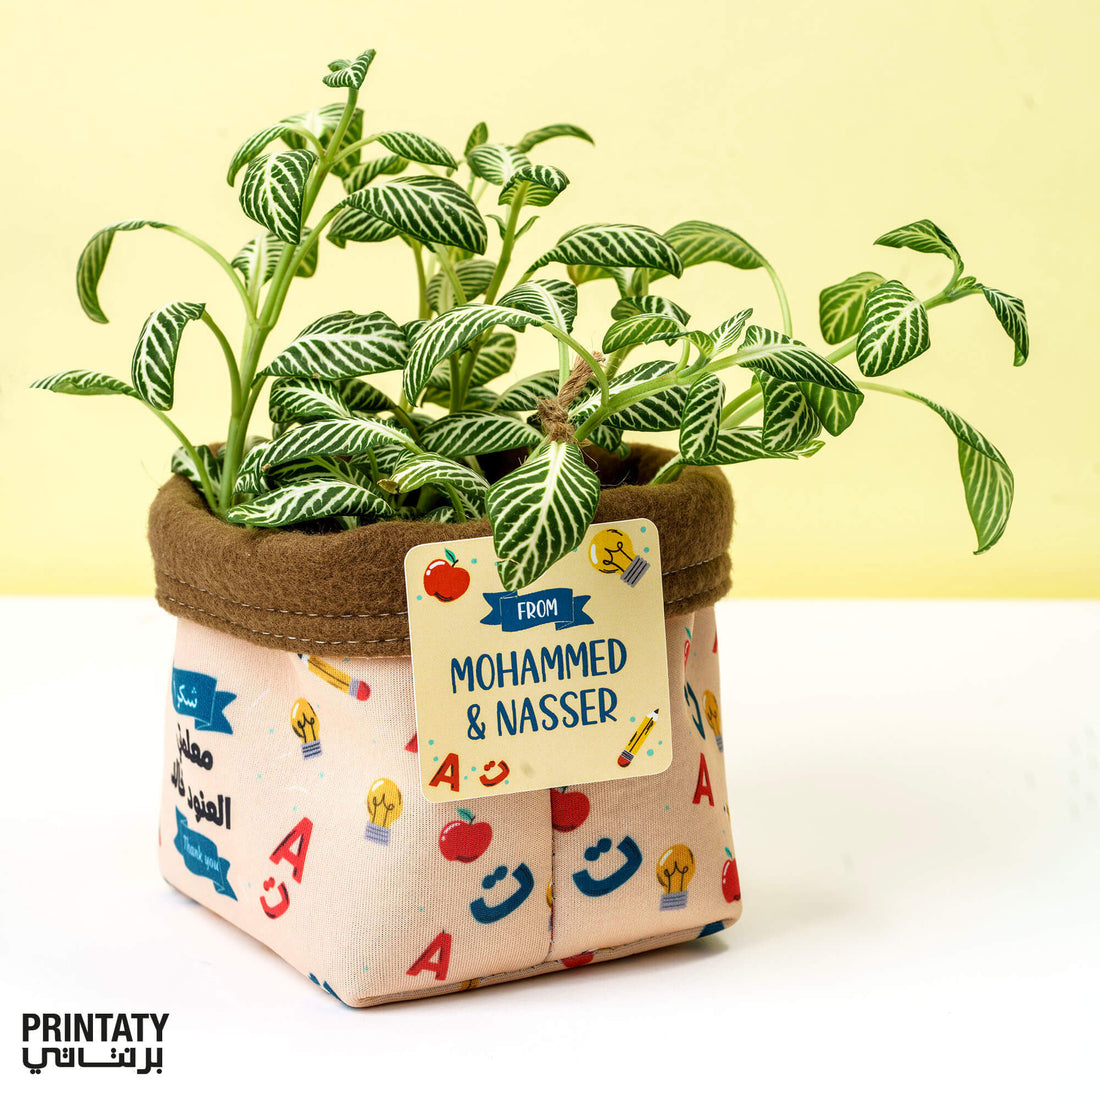 For the teacher: A plant inside a cloth basket with the teacher’s name printed on it, Along with a gift card